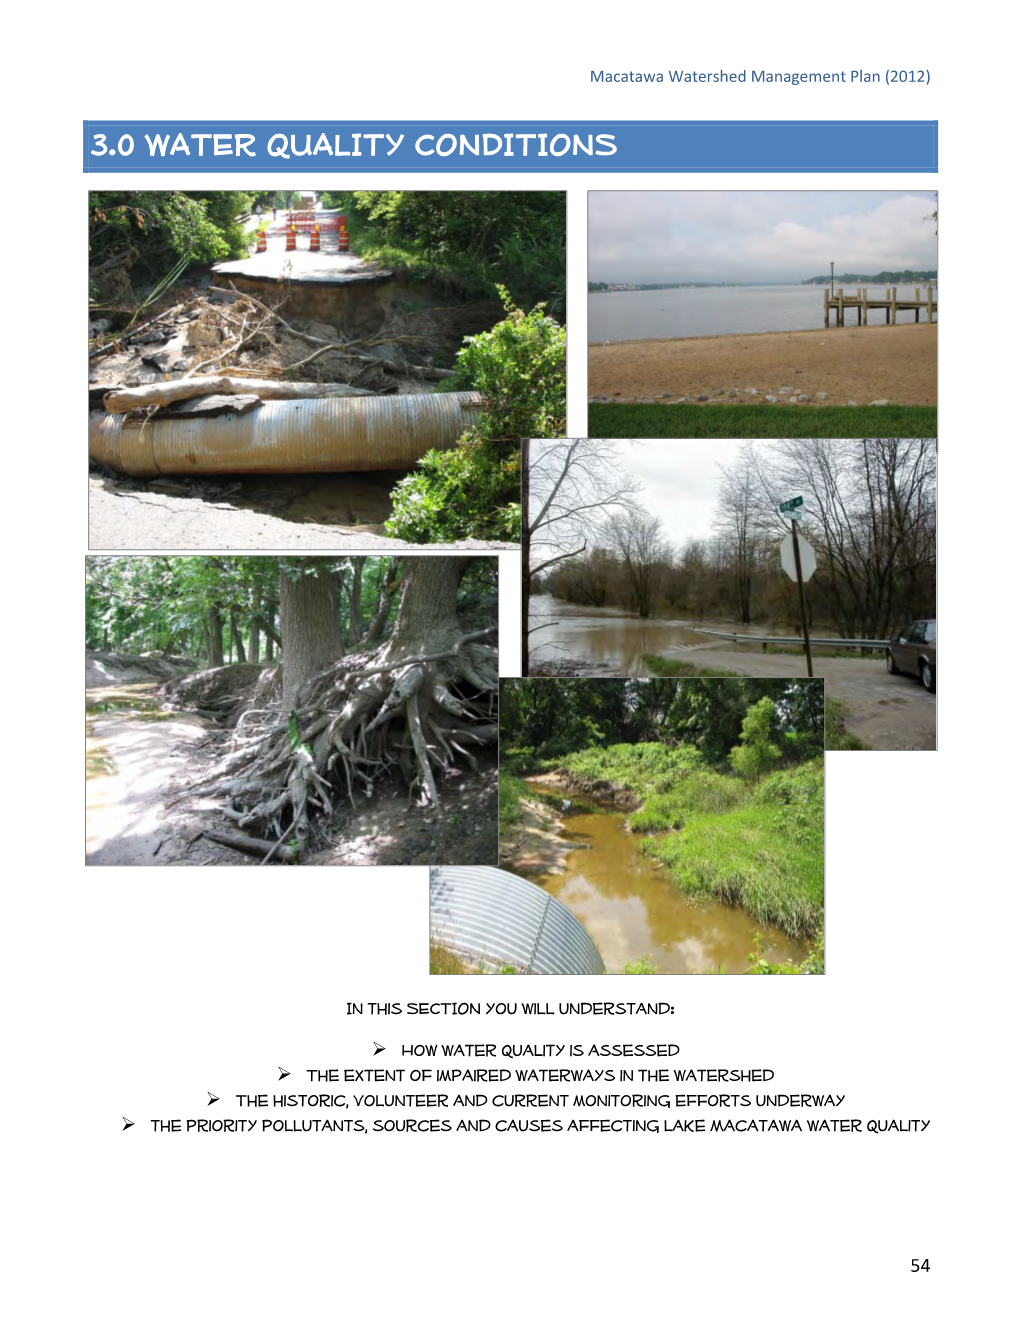 Macatawa Watershed Management Plan (2012) 3.0 WATER QUALITY CONDITIONS